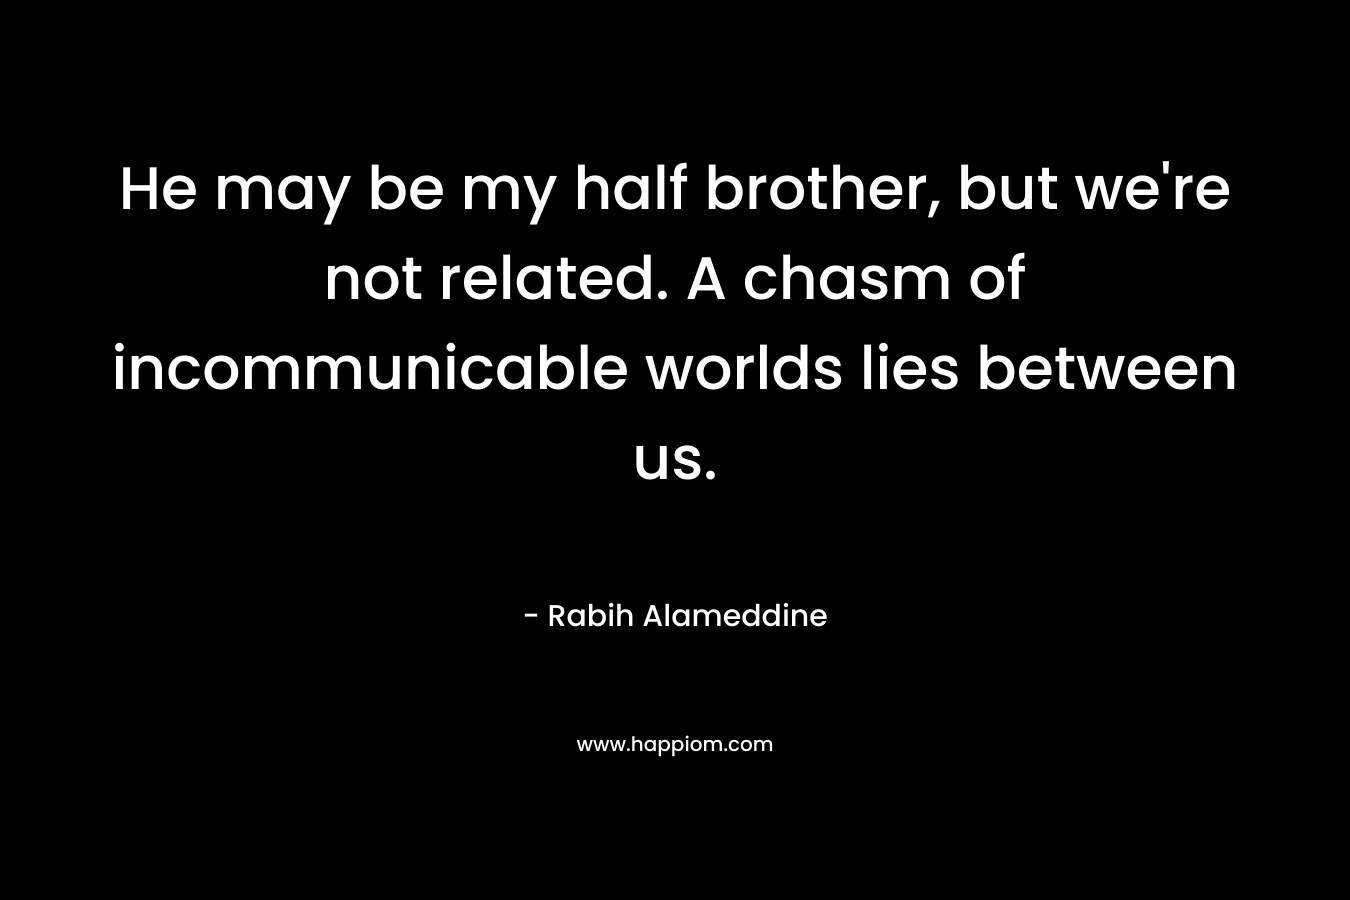 He may be my half brother, but we’re not related. A chasm of incommunicable worlds lies between us. – Rabih Alameddine